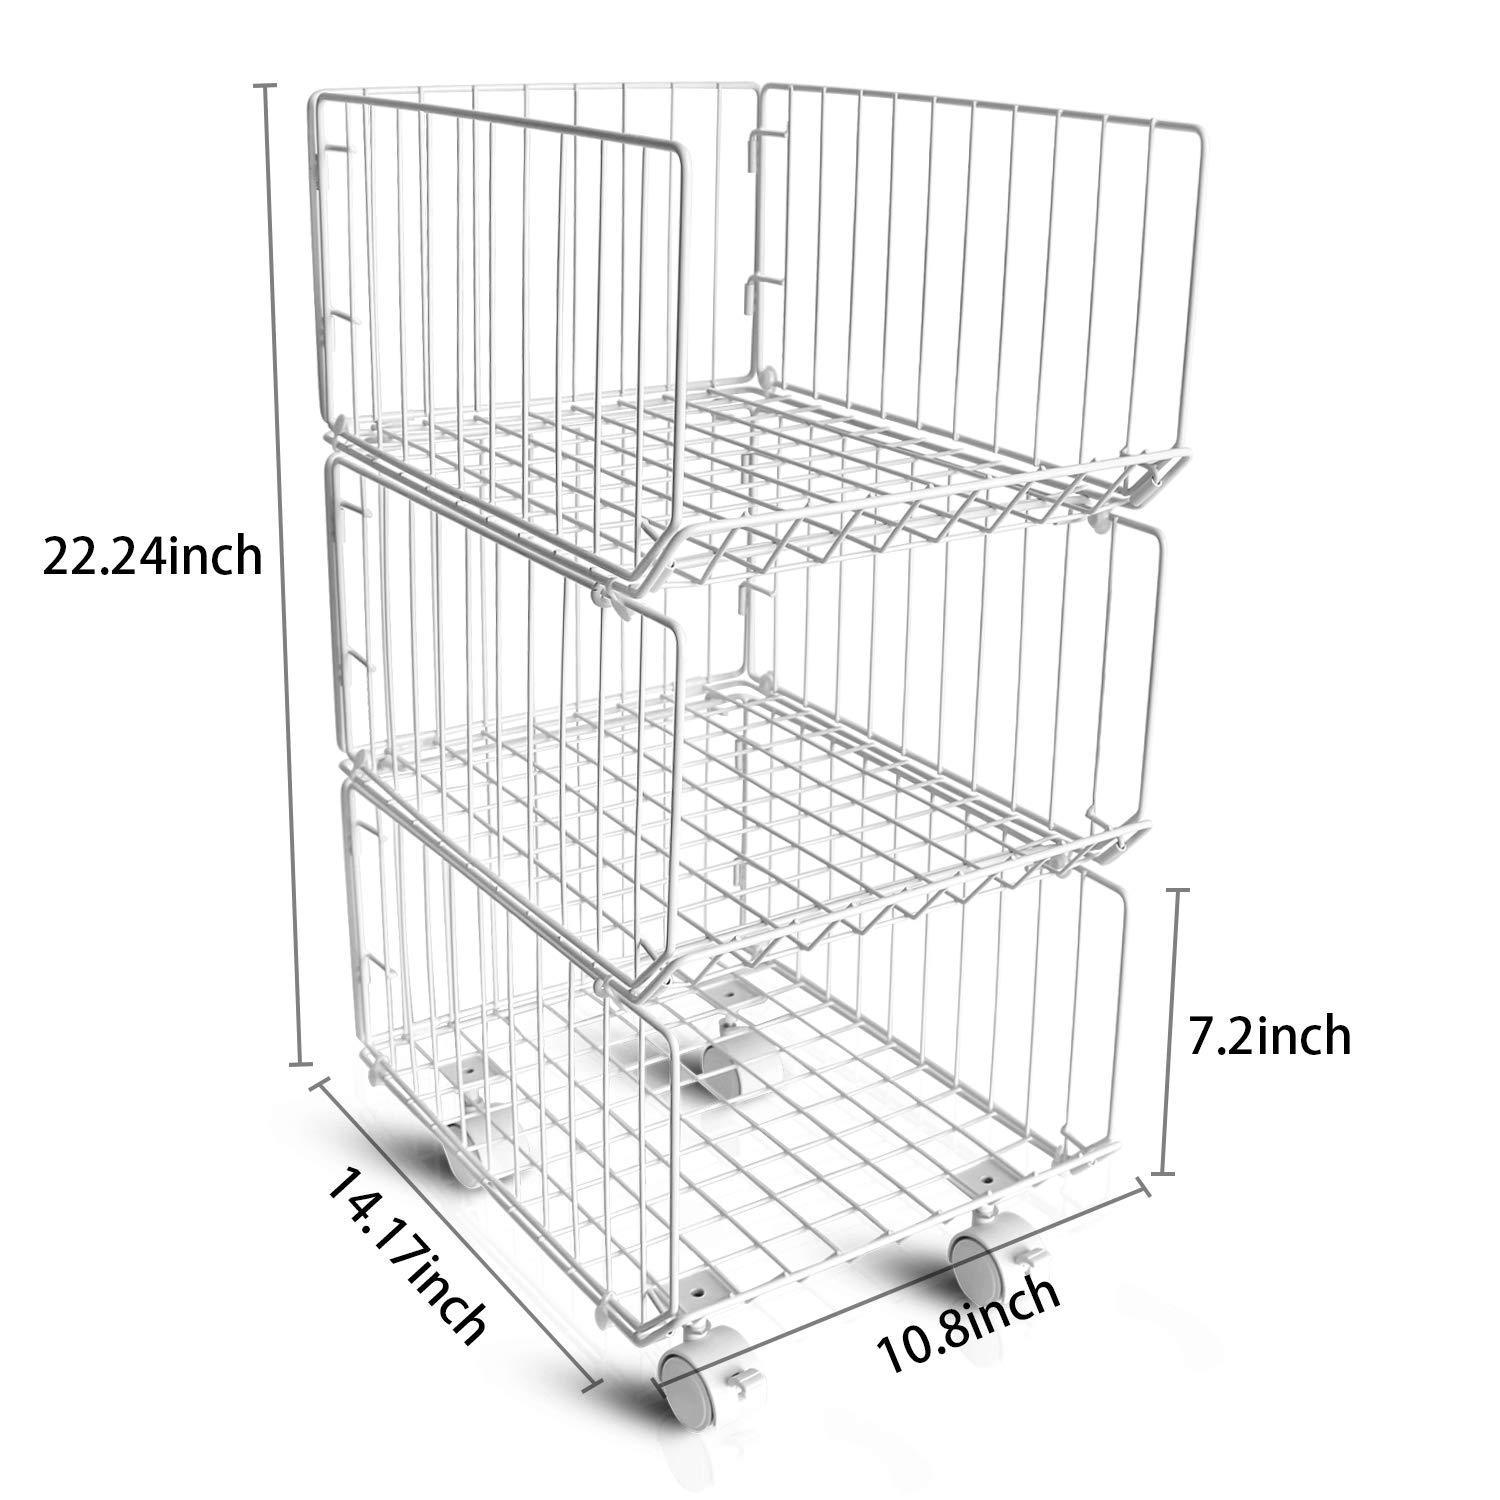 Exclusive pup joint metal wire baskets 3 tiers foldable stackable rolling baskets utility shelf unit storage organizer bin with wheels for kitchen pantry closets bedrooms bathrooms